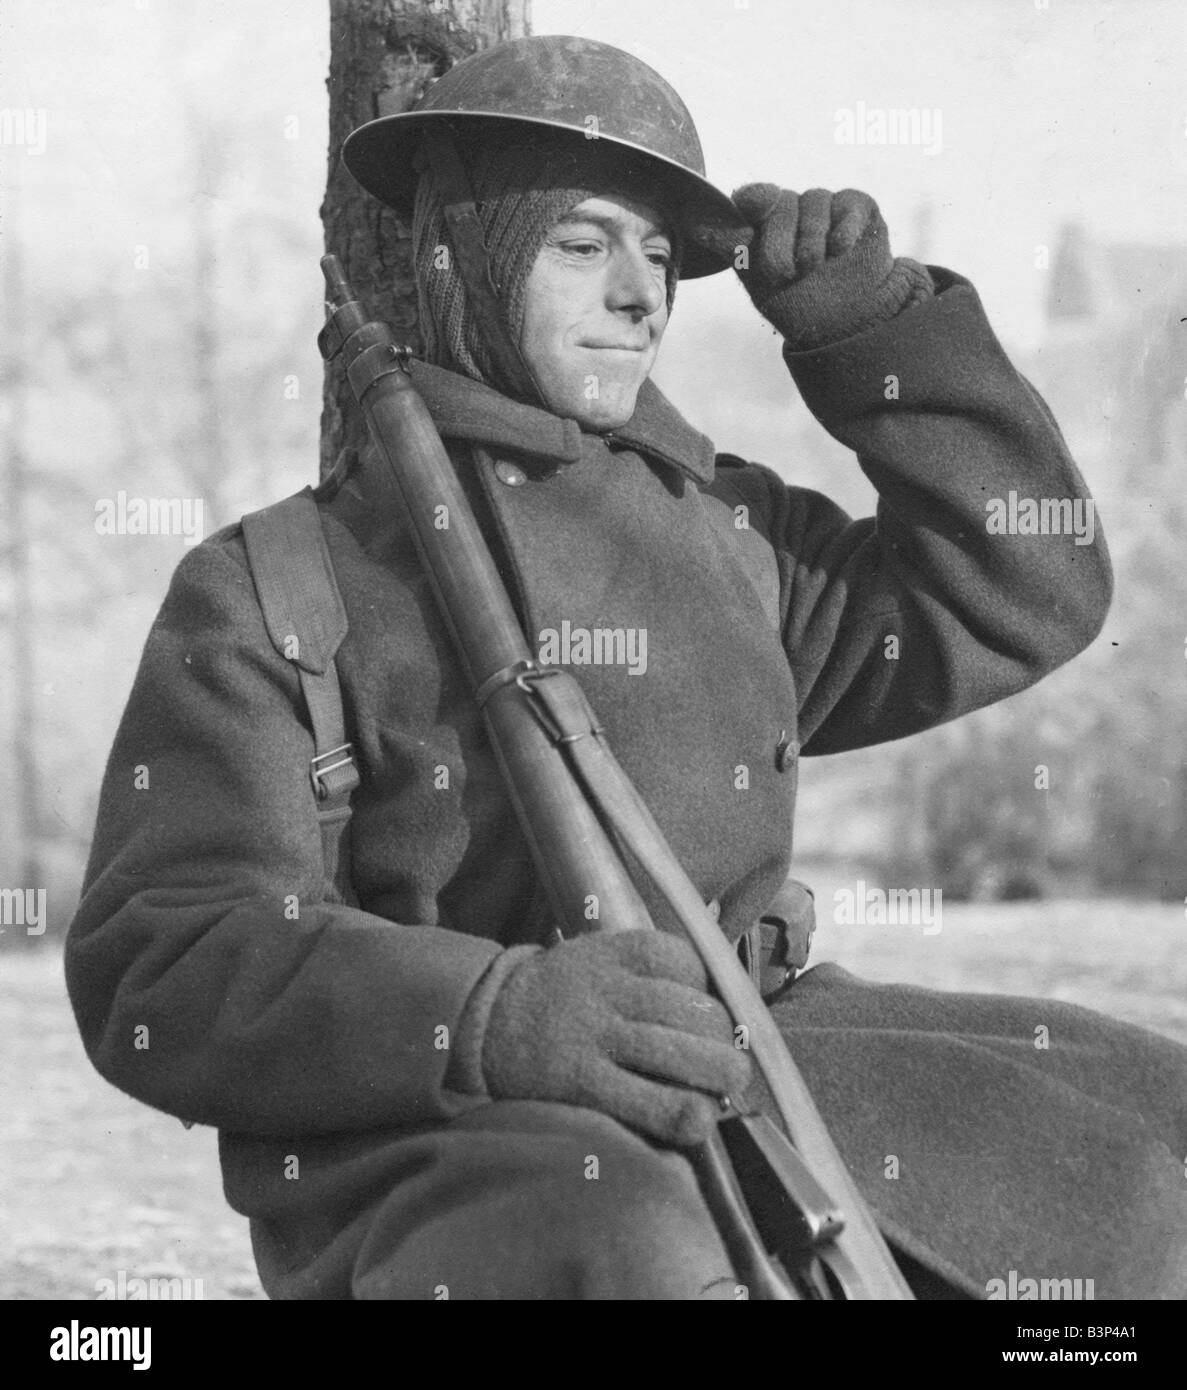 Driver David Smith of the Royal Engineers December 1944 in Belgium thinking of home Sitting up against tree holding his rifle and adjusting his tin helmet Wearing thick overcoat and gloves Stock Photo